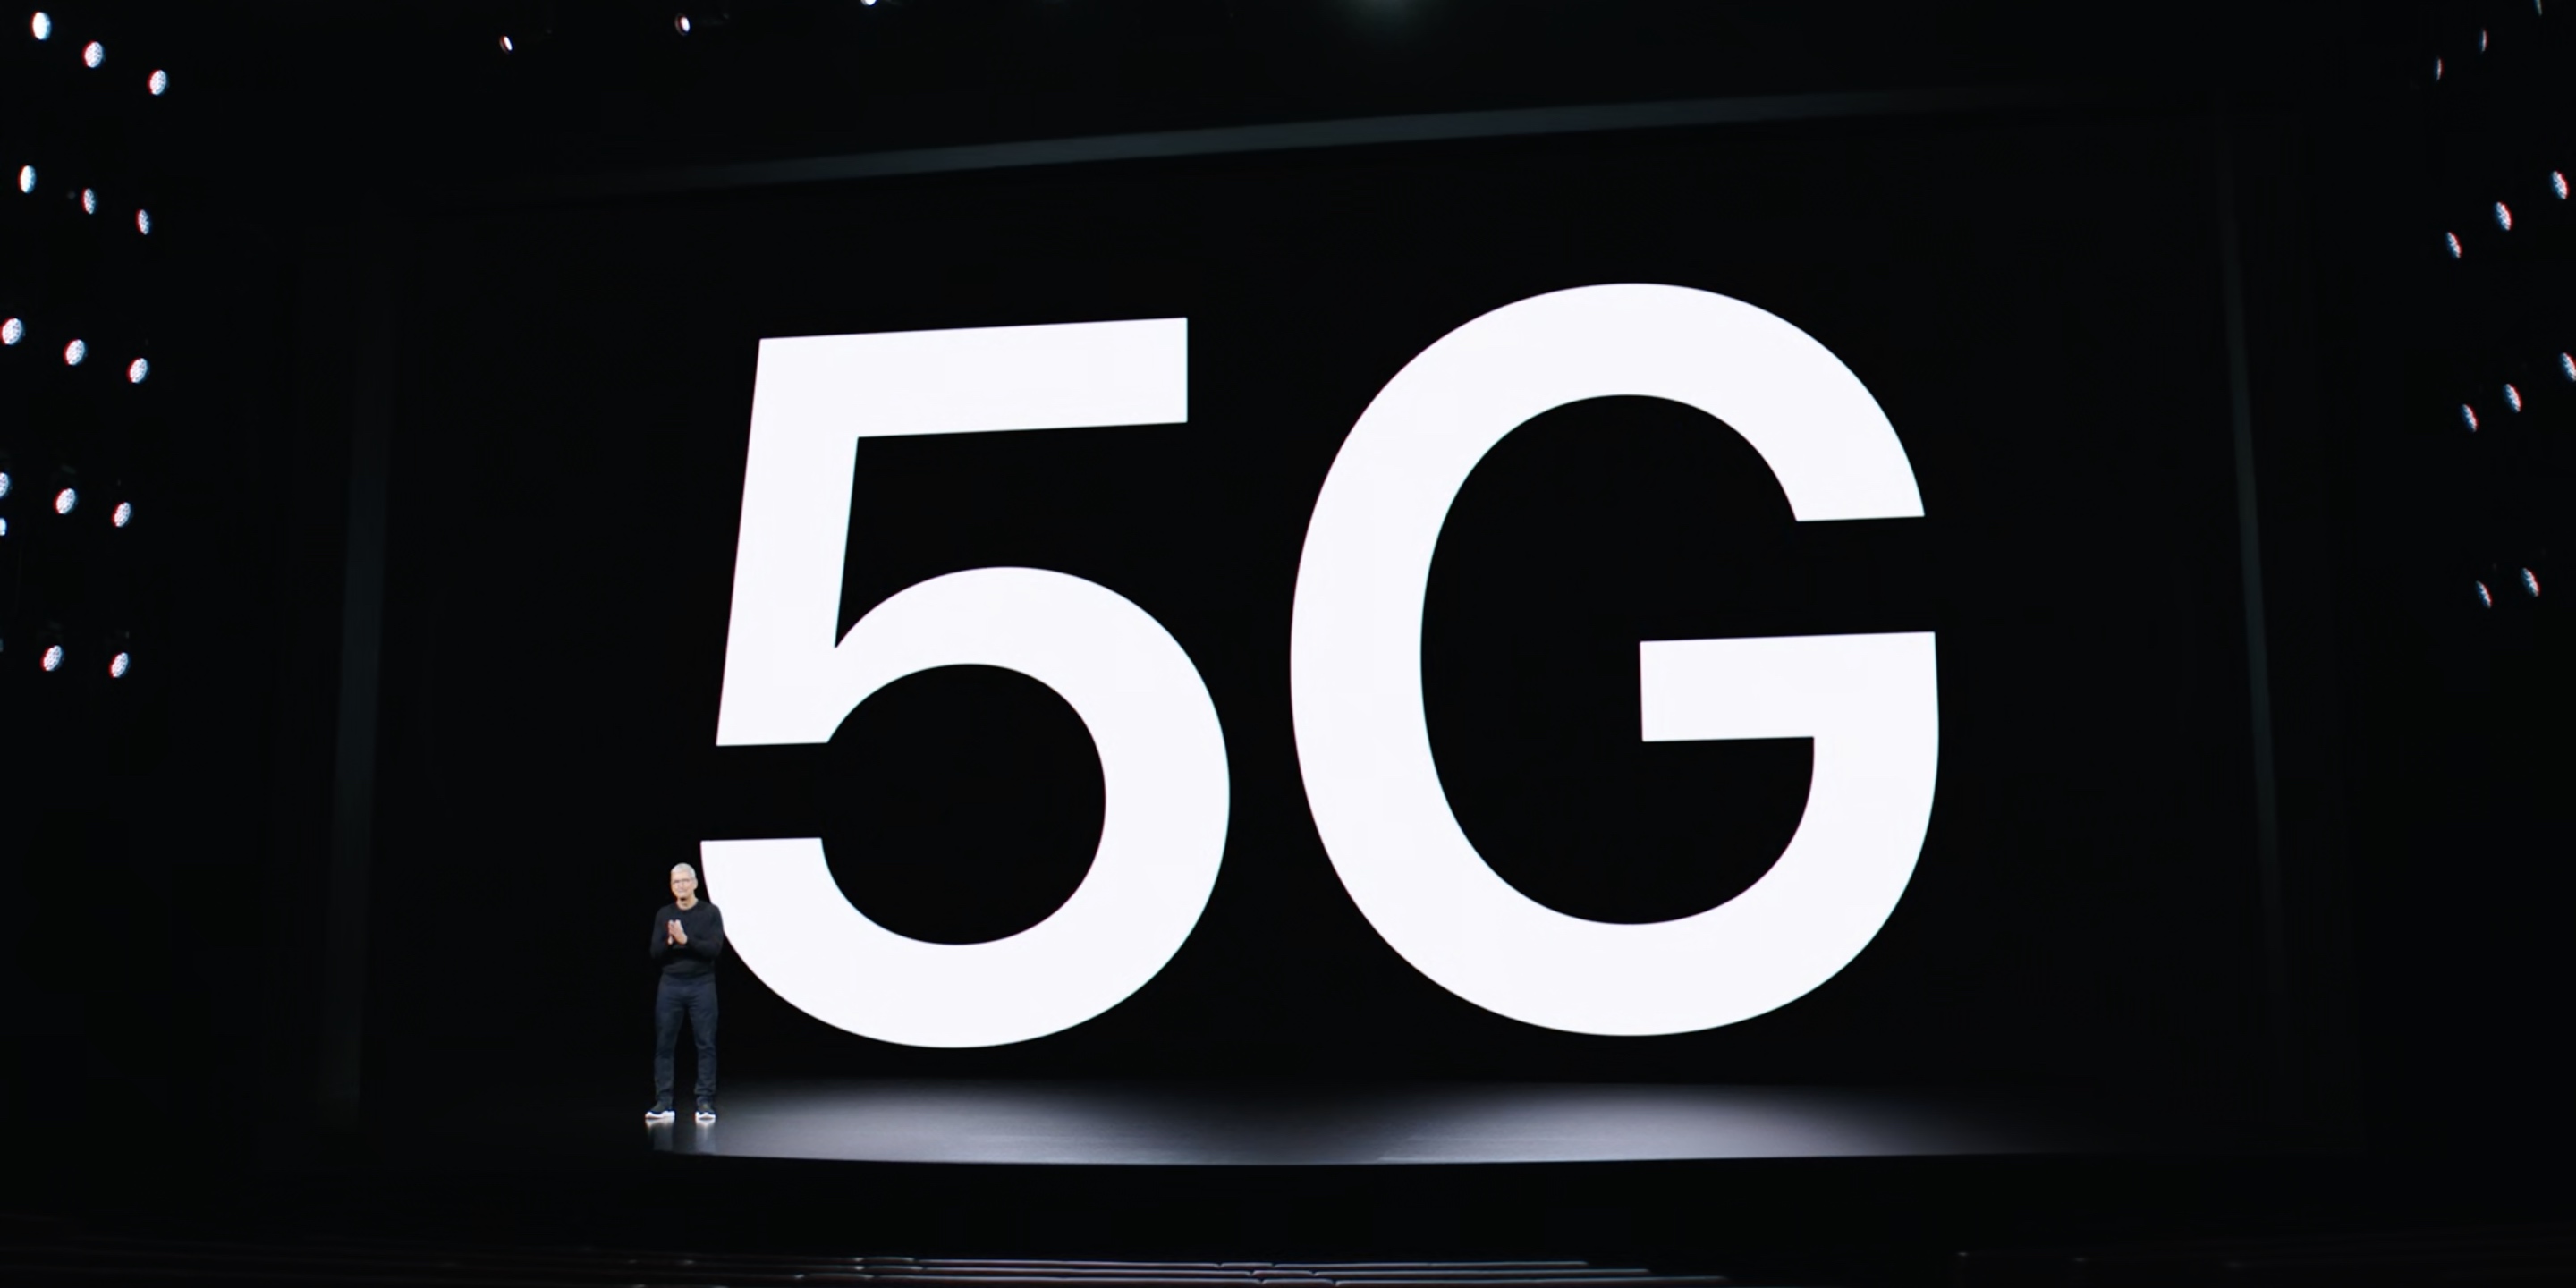 iPhone 15 Pro comes with major boost in 5G speeds - 9to5Mac